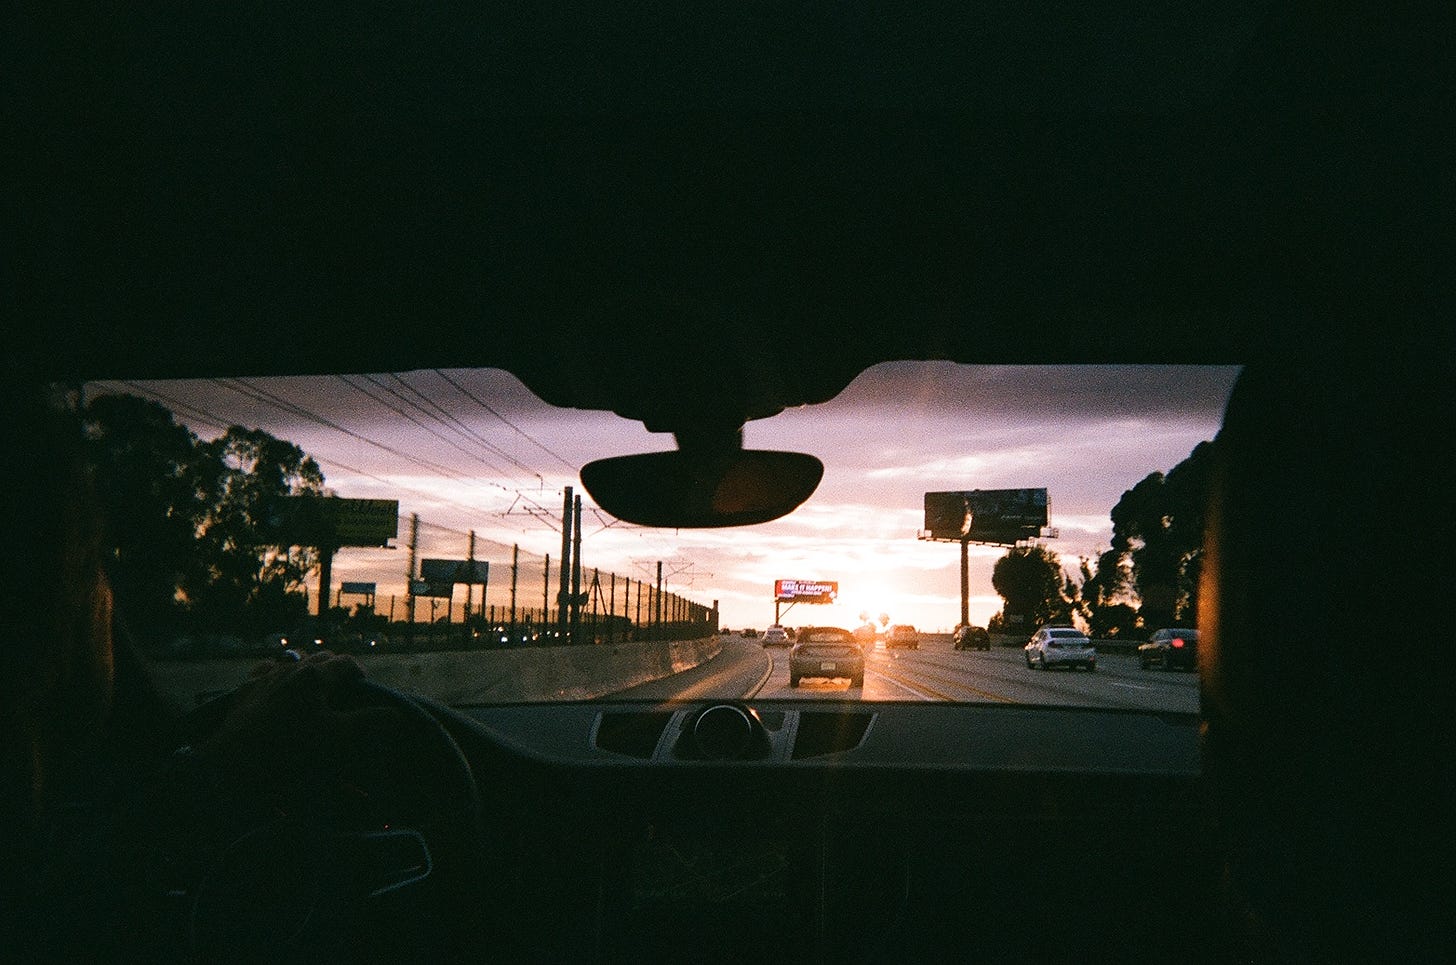 A Los Angeles freeway at sunset through the front windshield of a car, as seen from the car's backseat.